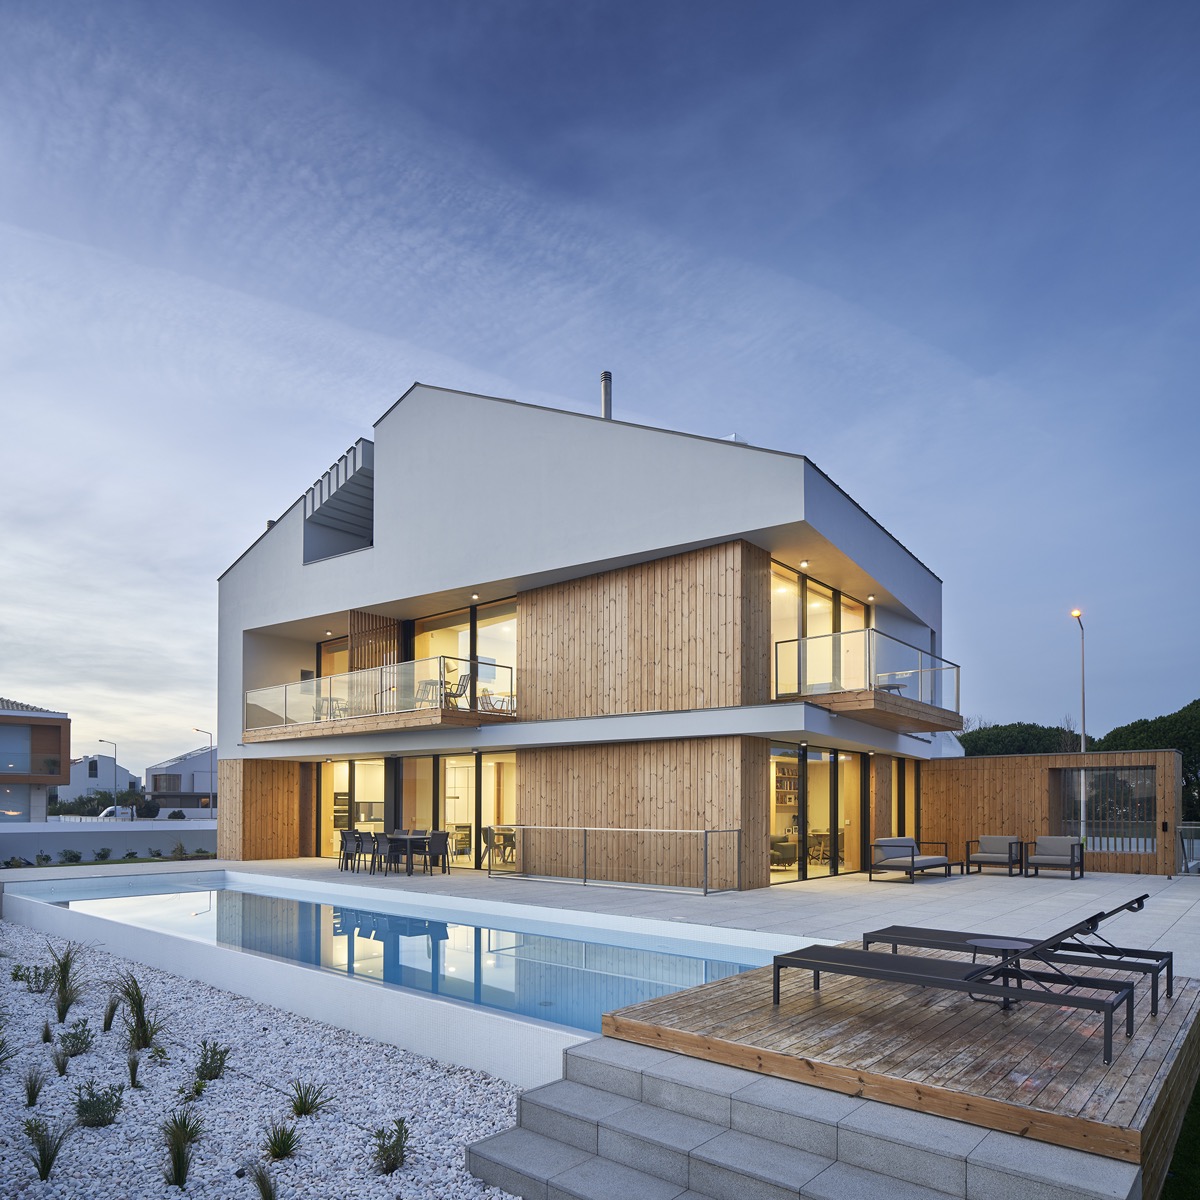 A Modern Pitched Roof House On Portugal's West Coast [Video]